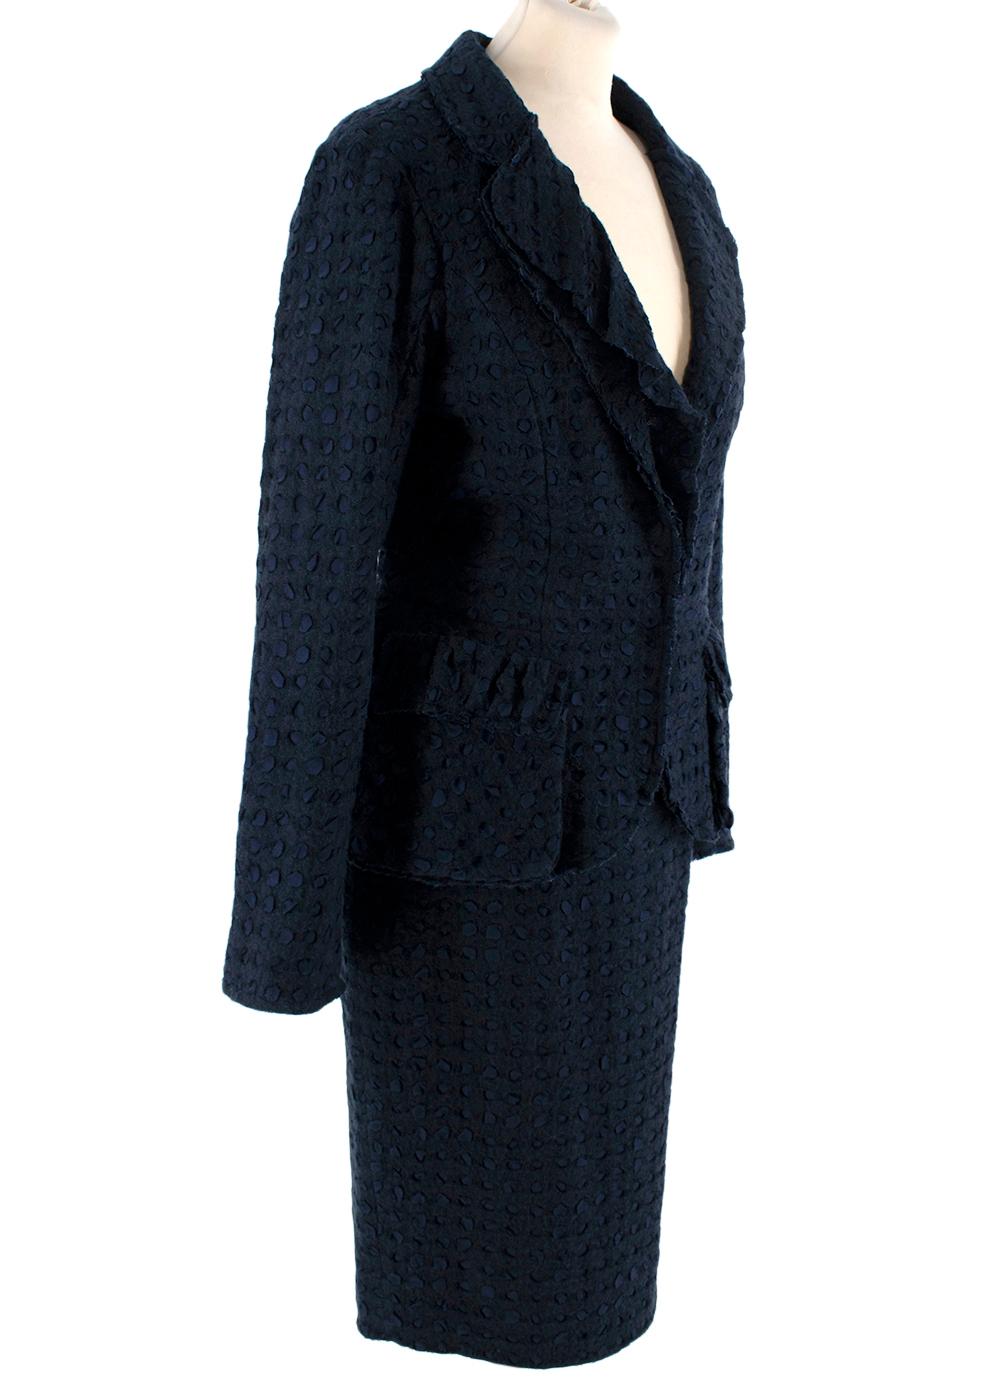 Nina Ricci Navy Blue Textured Boucle Wool & Ribbon Skirt Suit Set

- Elegant textural skirt suit, crafted from an unusual navy blue boucle wool and fabric fusion, creating a tone-on-tone polka-dot effect 
- Single breasted jacket, with peplum hem